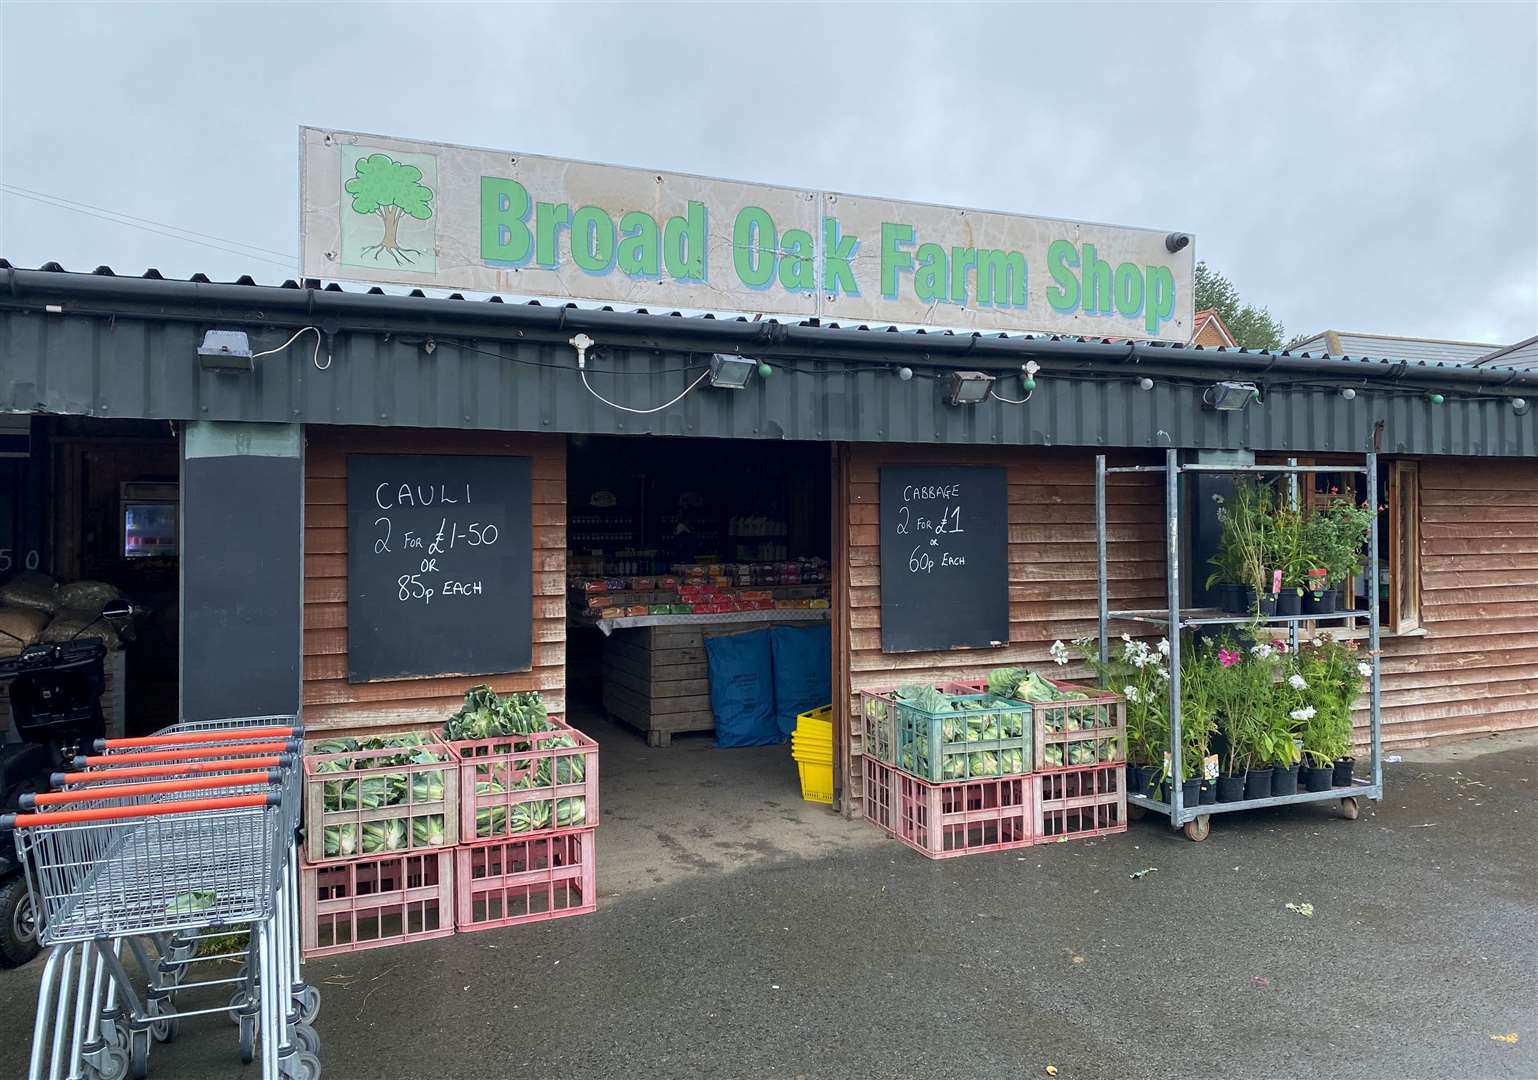 Broad Oak Farm Shop has closed after almost two decades of trade